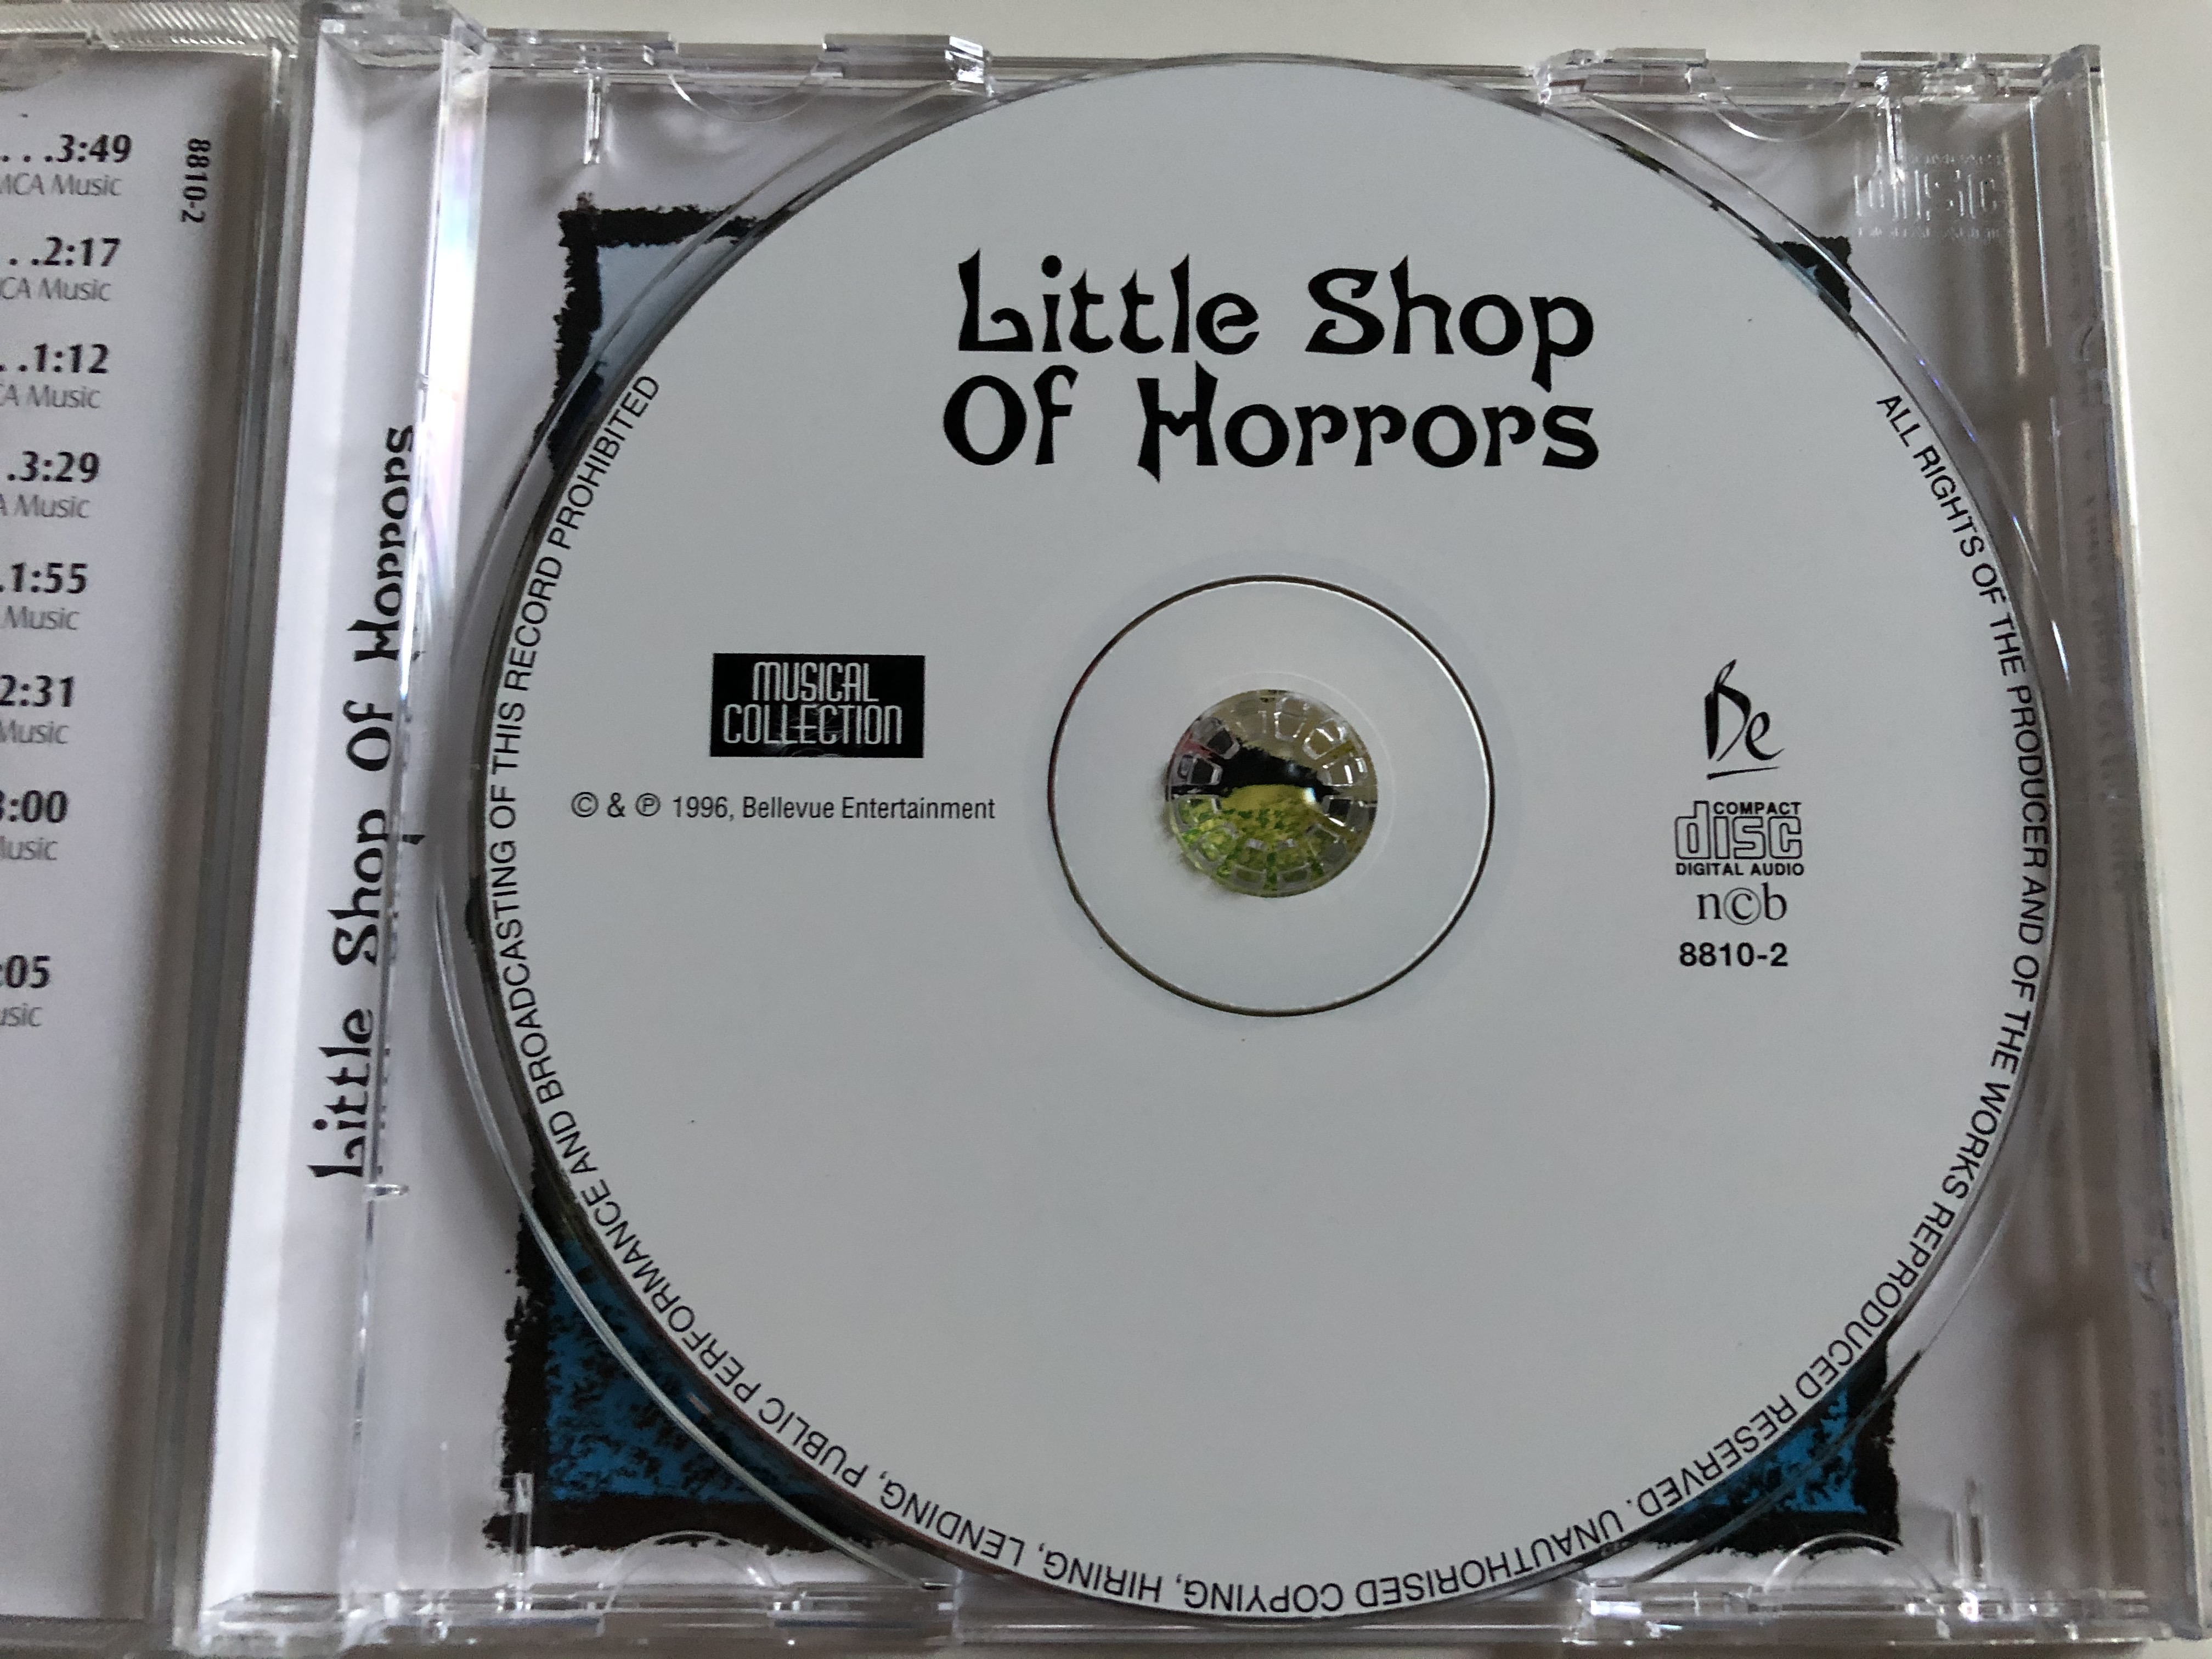 little-shop-of-horrors-includes-grow-for-me-dentist-feed-me-glt-it-suddenly-seymour-suppertime-bellevue-entertainment-audio-cd-1996-8810-2-4-.jpg